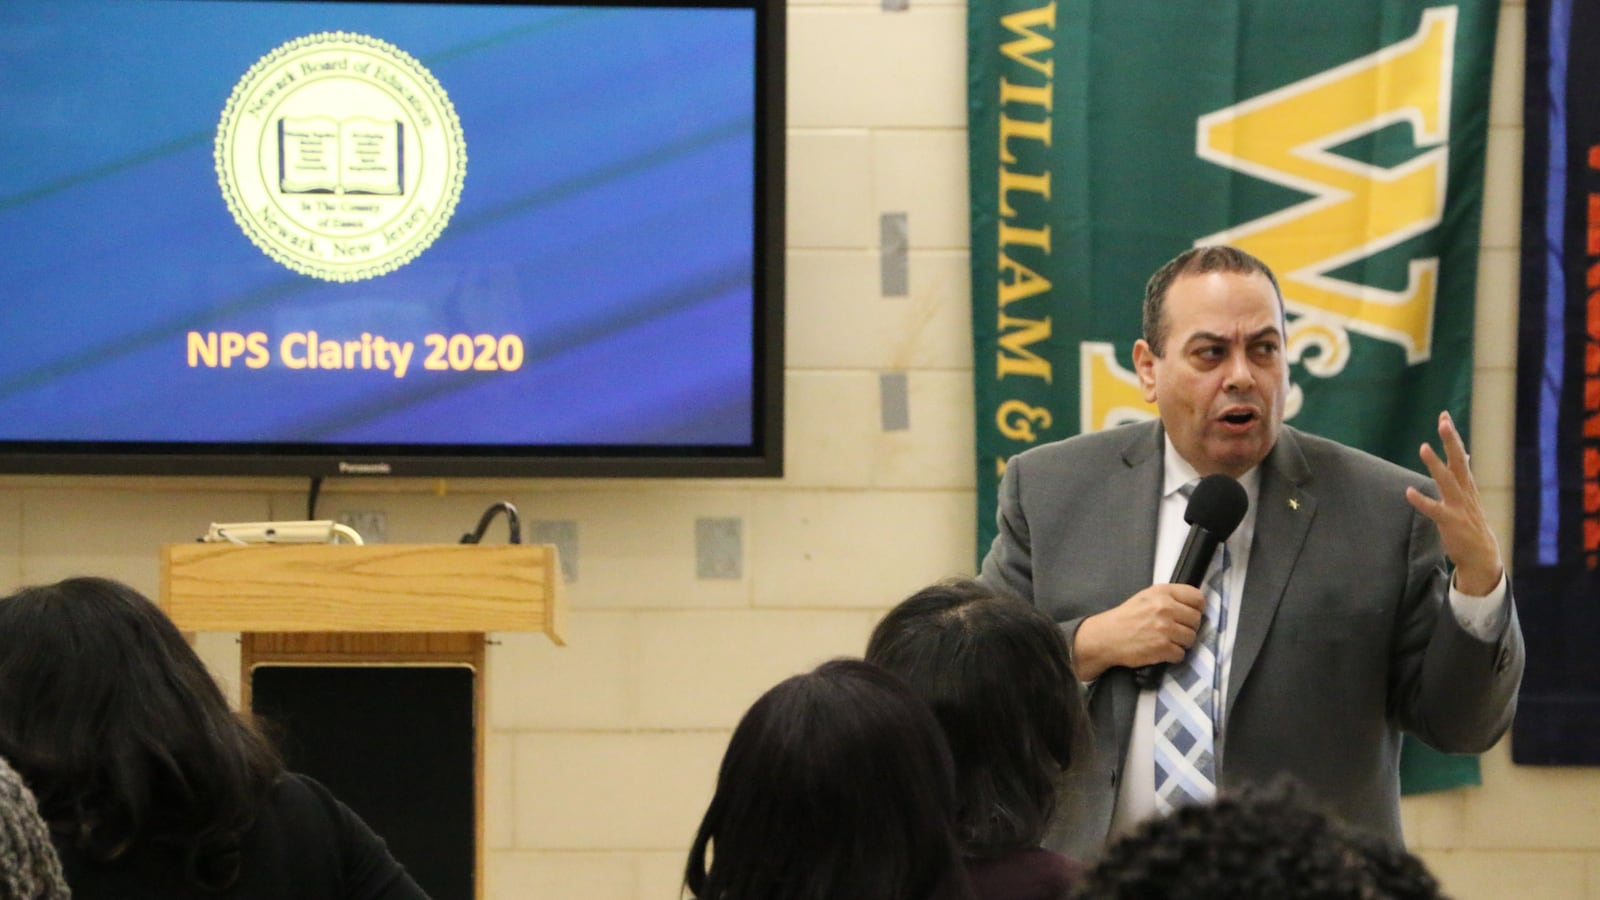 Superintendent Roger León  has faced calls to share more details of his agenda. On Wednesday, he unveiled his "NPS Clarity 2020" strategy.